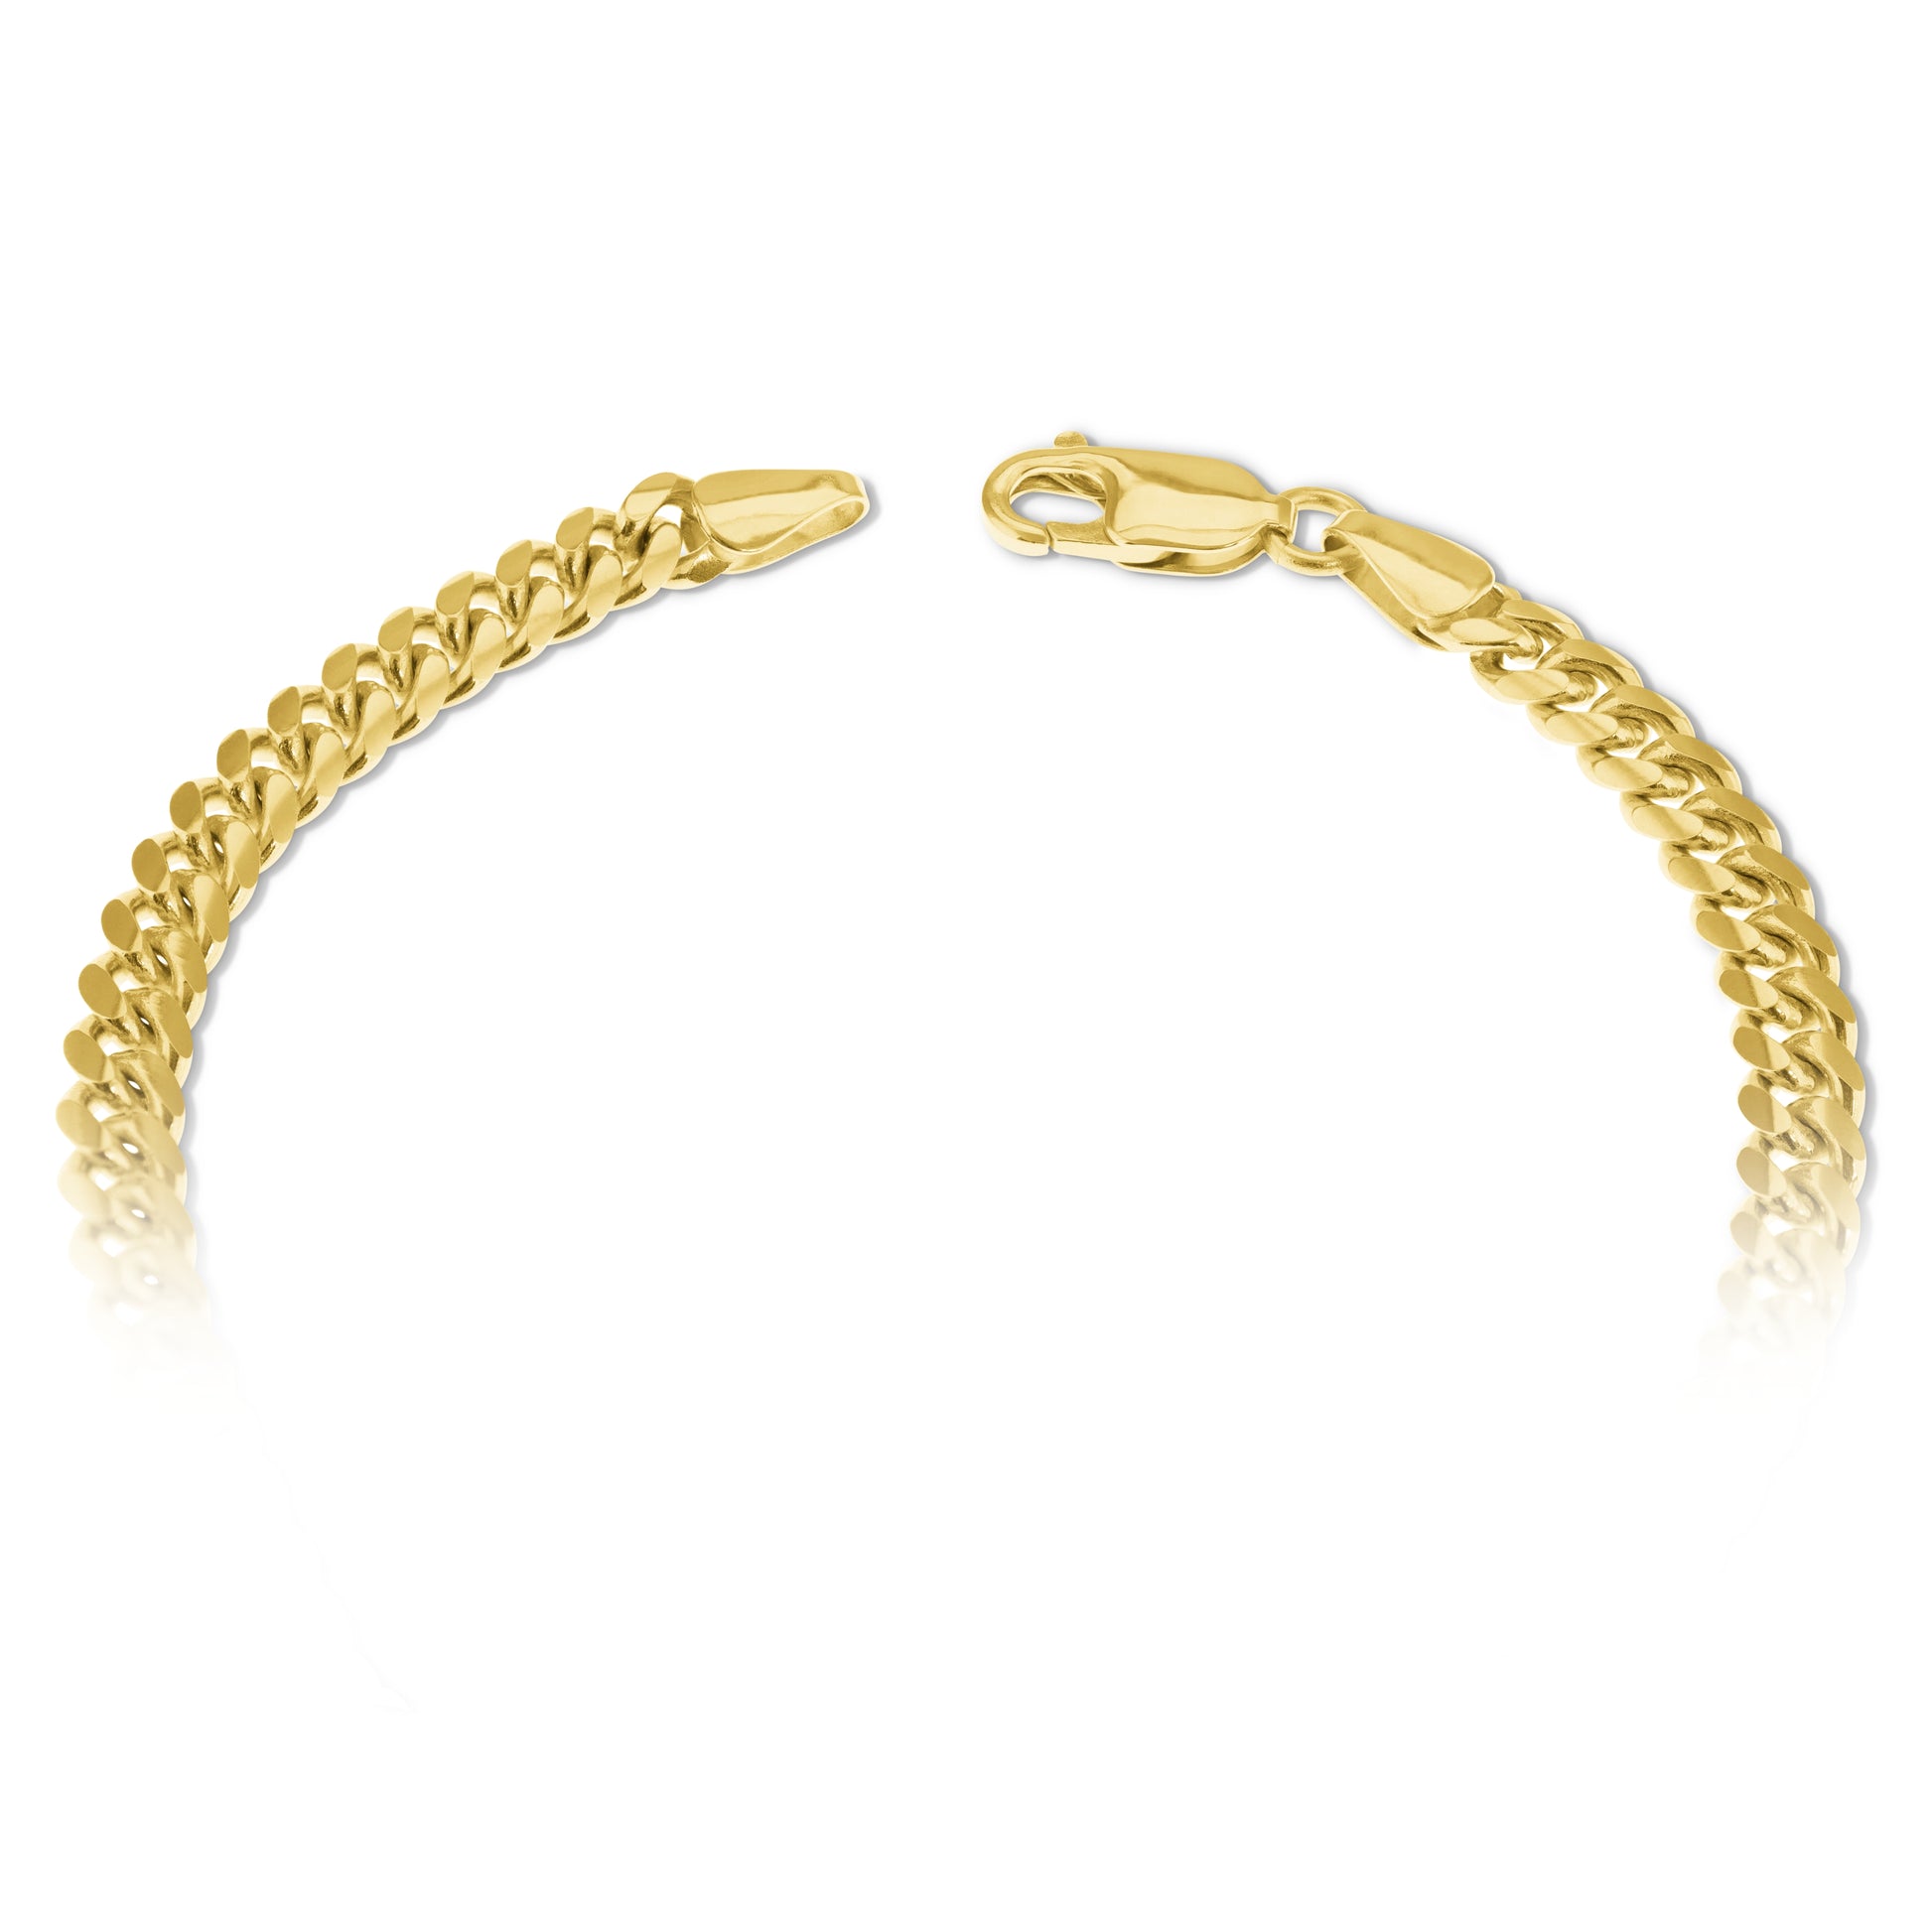 10K Yellow Gold Lobster Clasp Cuban Link Chain 4Mm 20In 13.3Dwt/ 20.7 G